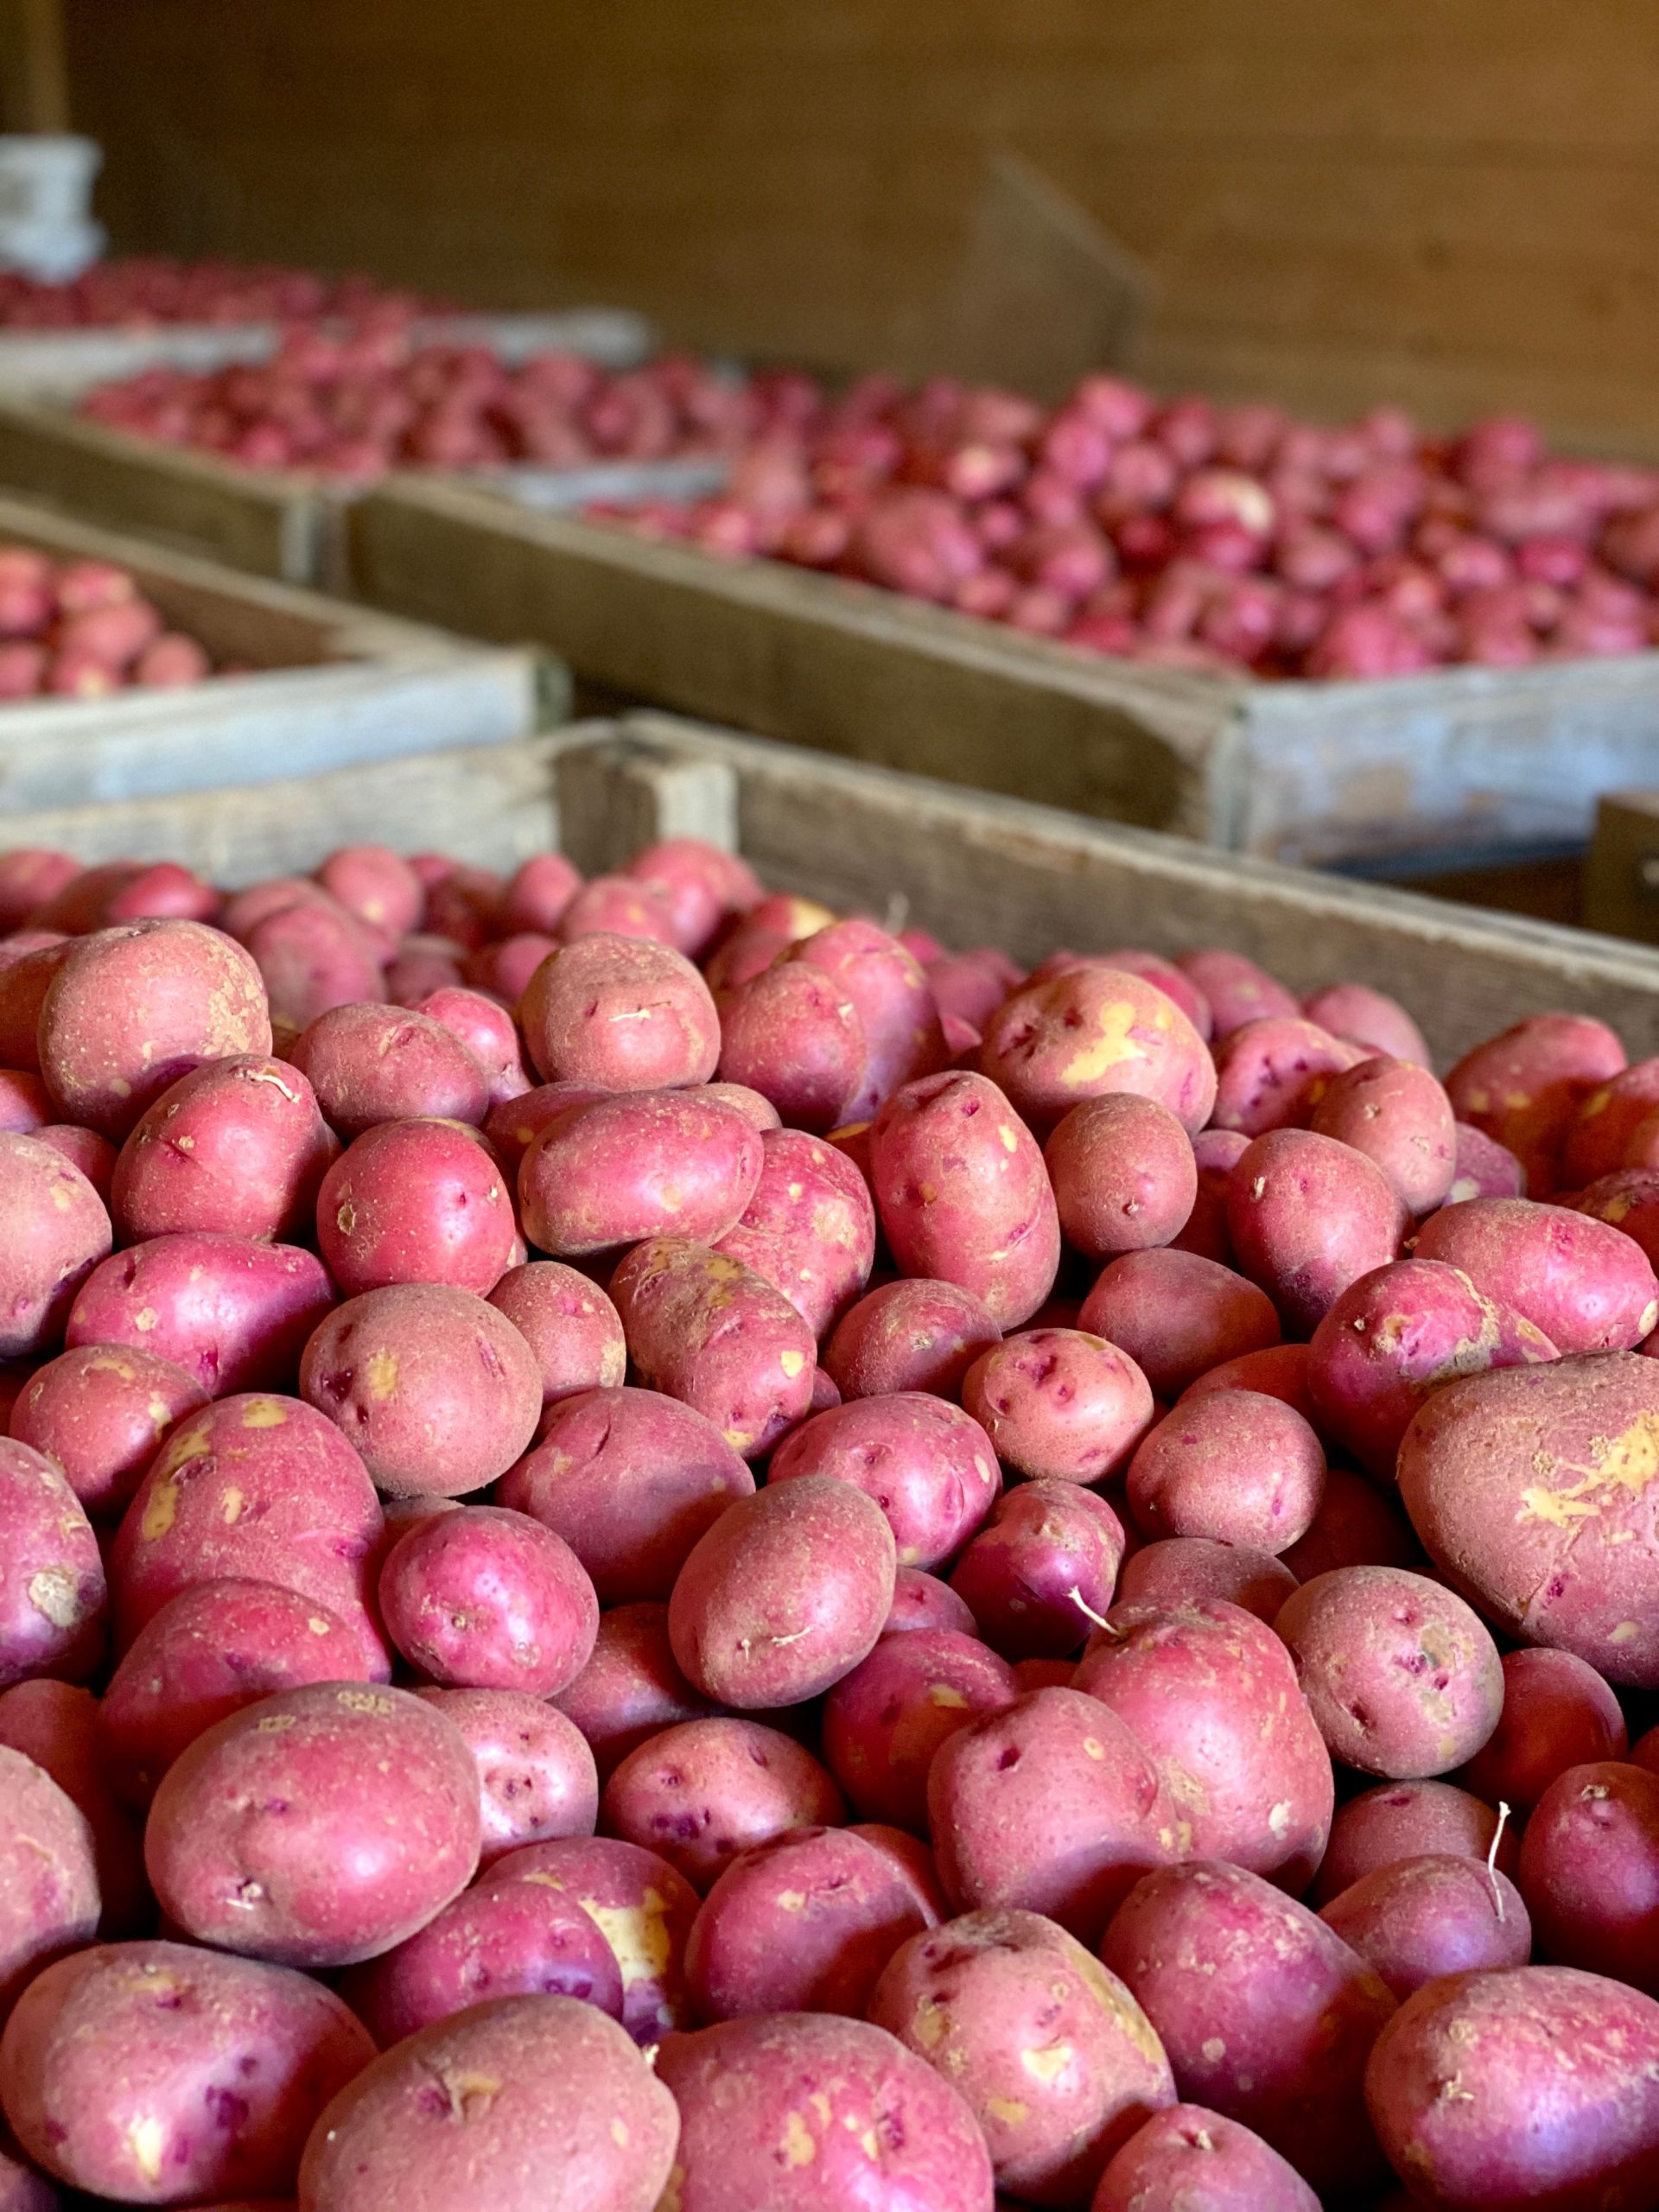 Boxes of red potatoes from Thomas Vegetable Farm